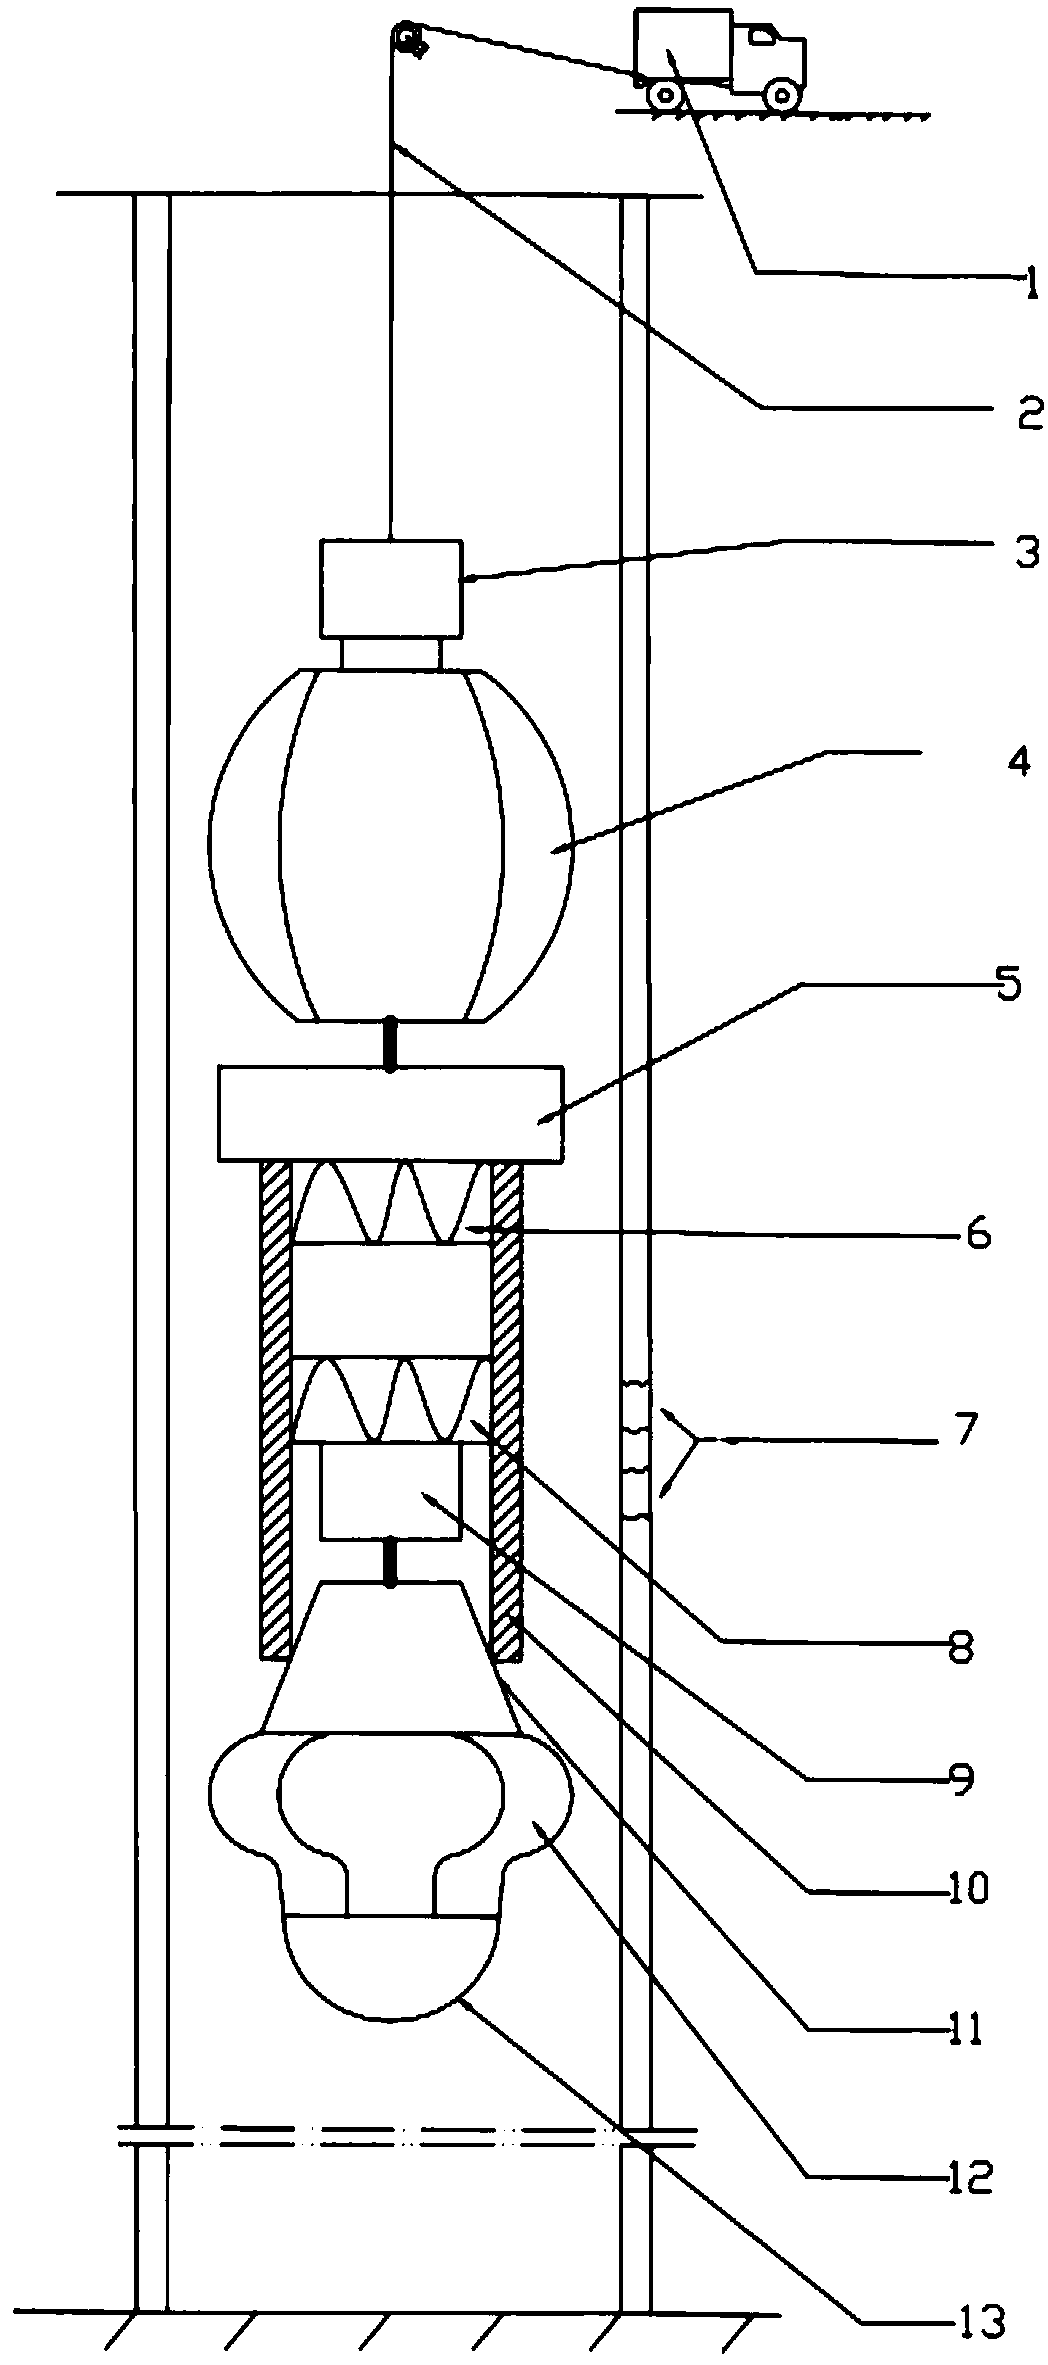 Integrated device for casing damage well composite repair